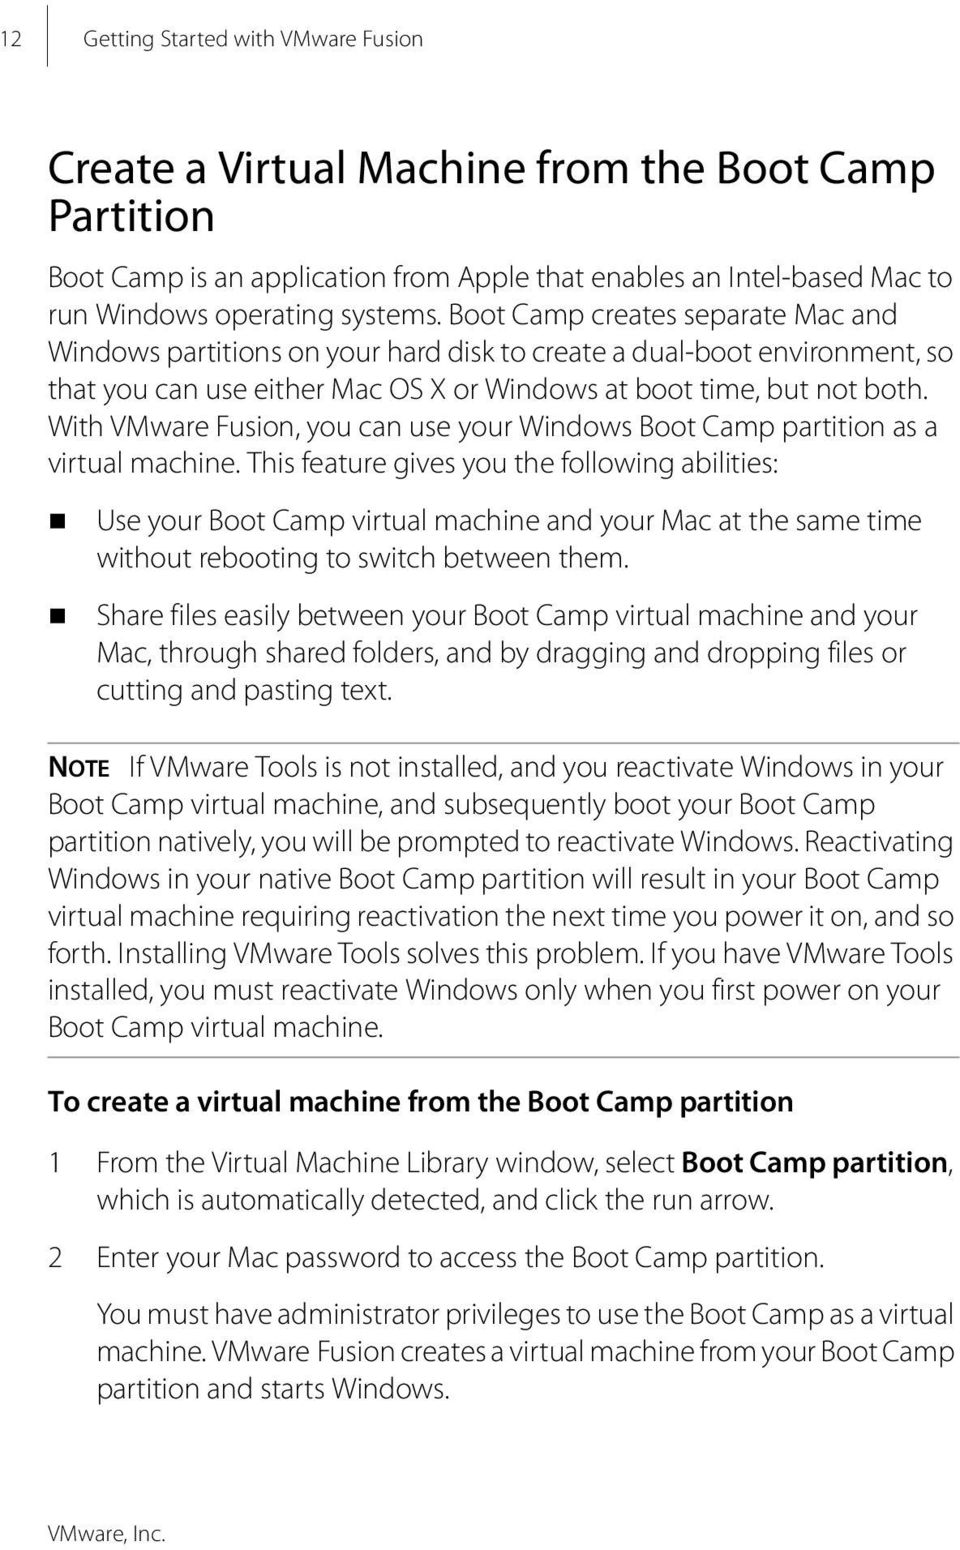 With VMware Fusion, you can use your Windows Boot Camp partition as a virtual machine.